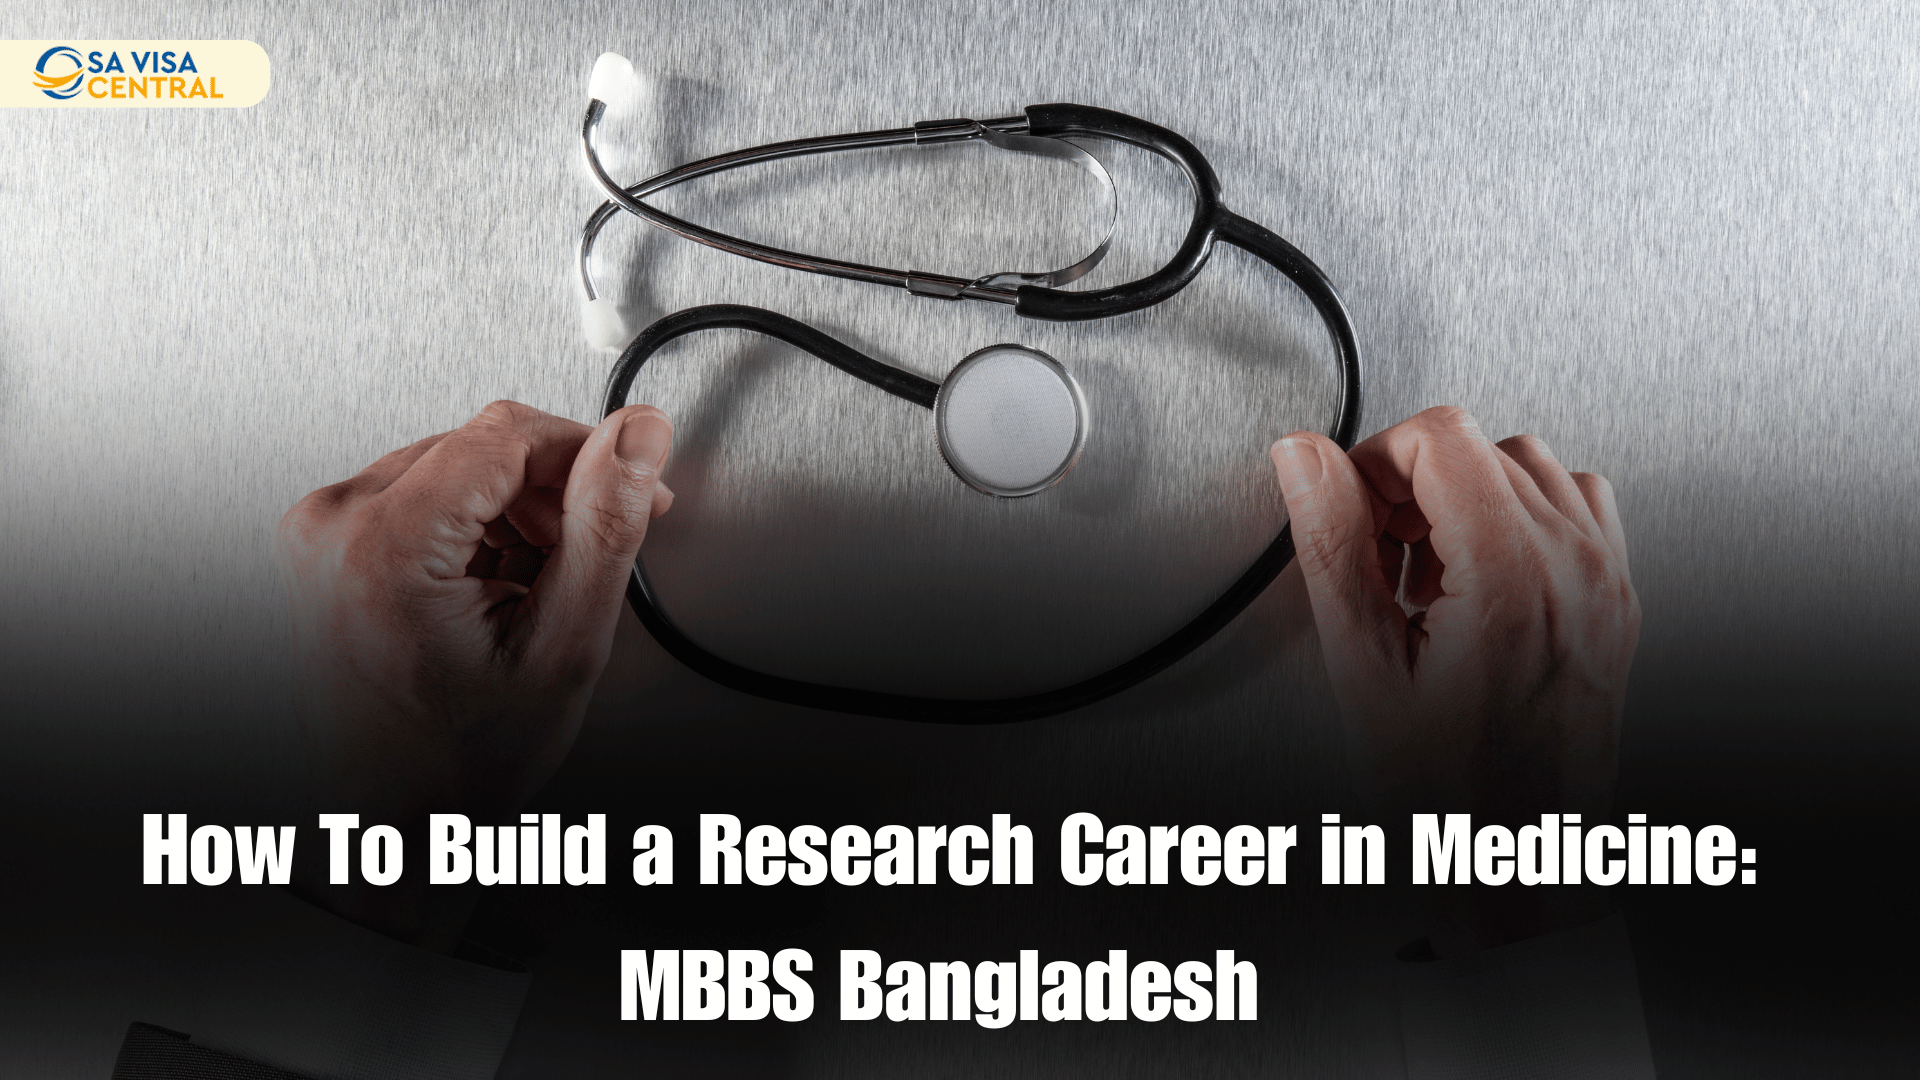 How To Build a Research Career in Medicine: MBBS Bangladesh